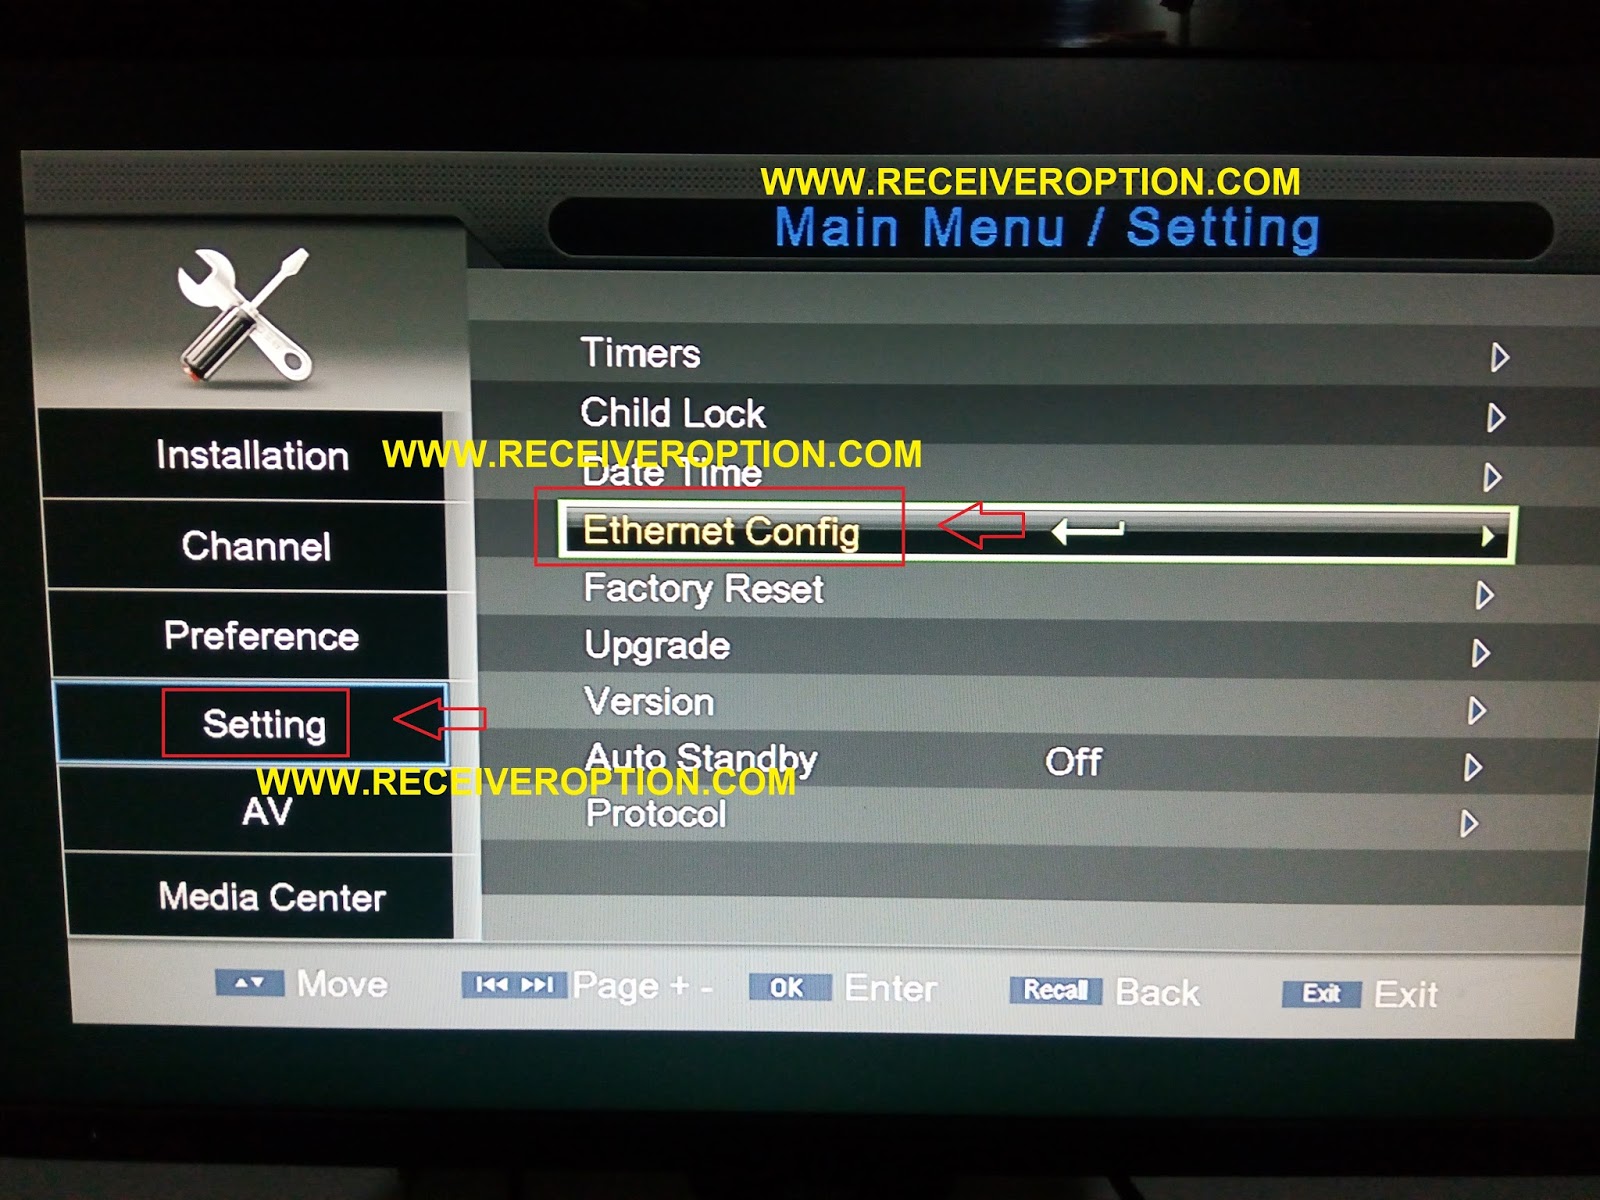 how to get channels from echolink receiver